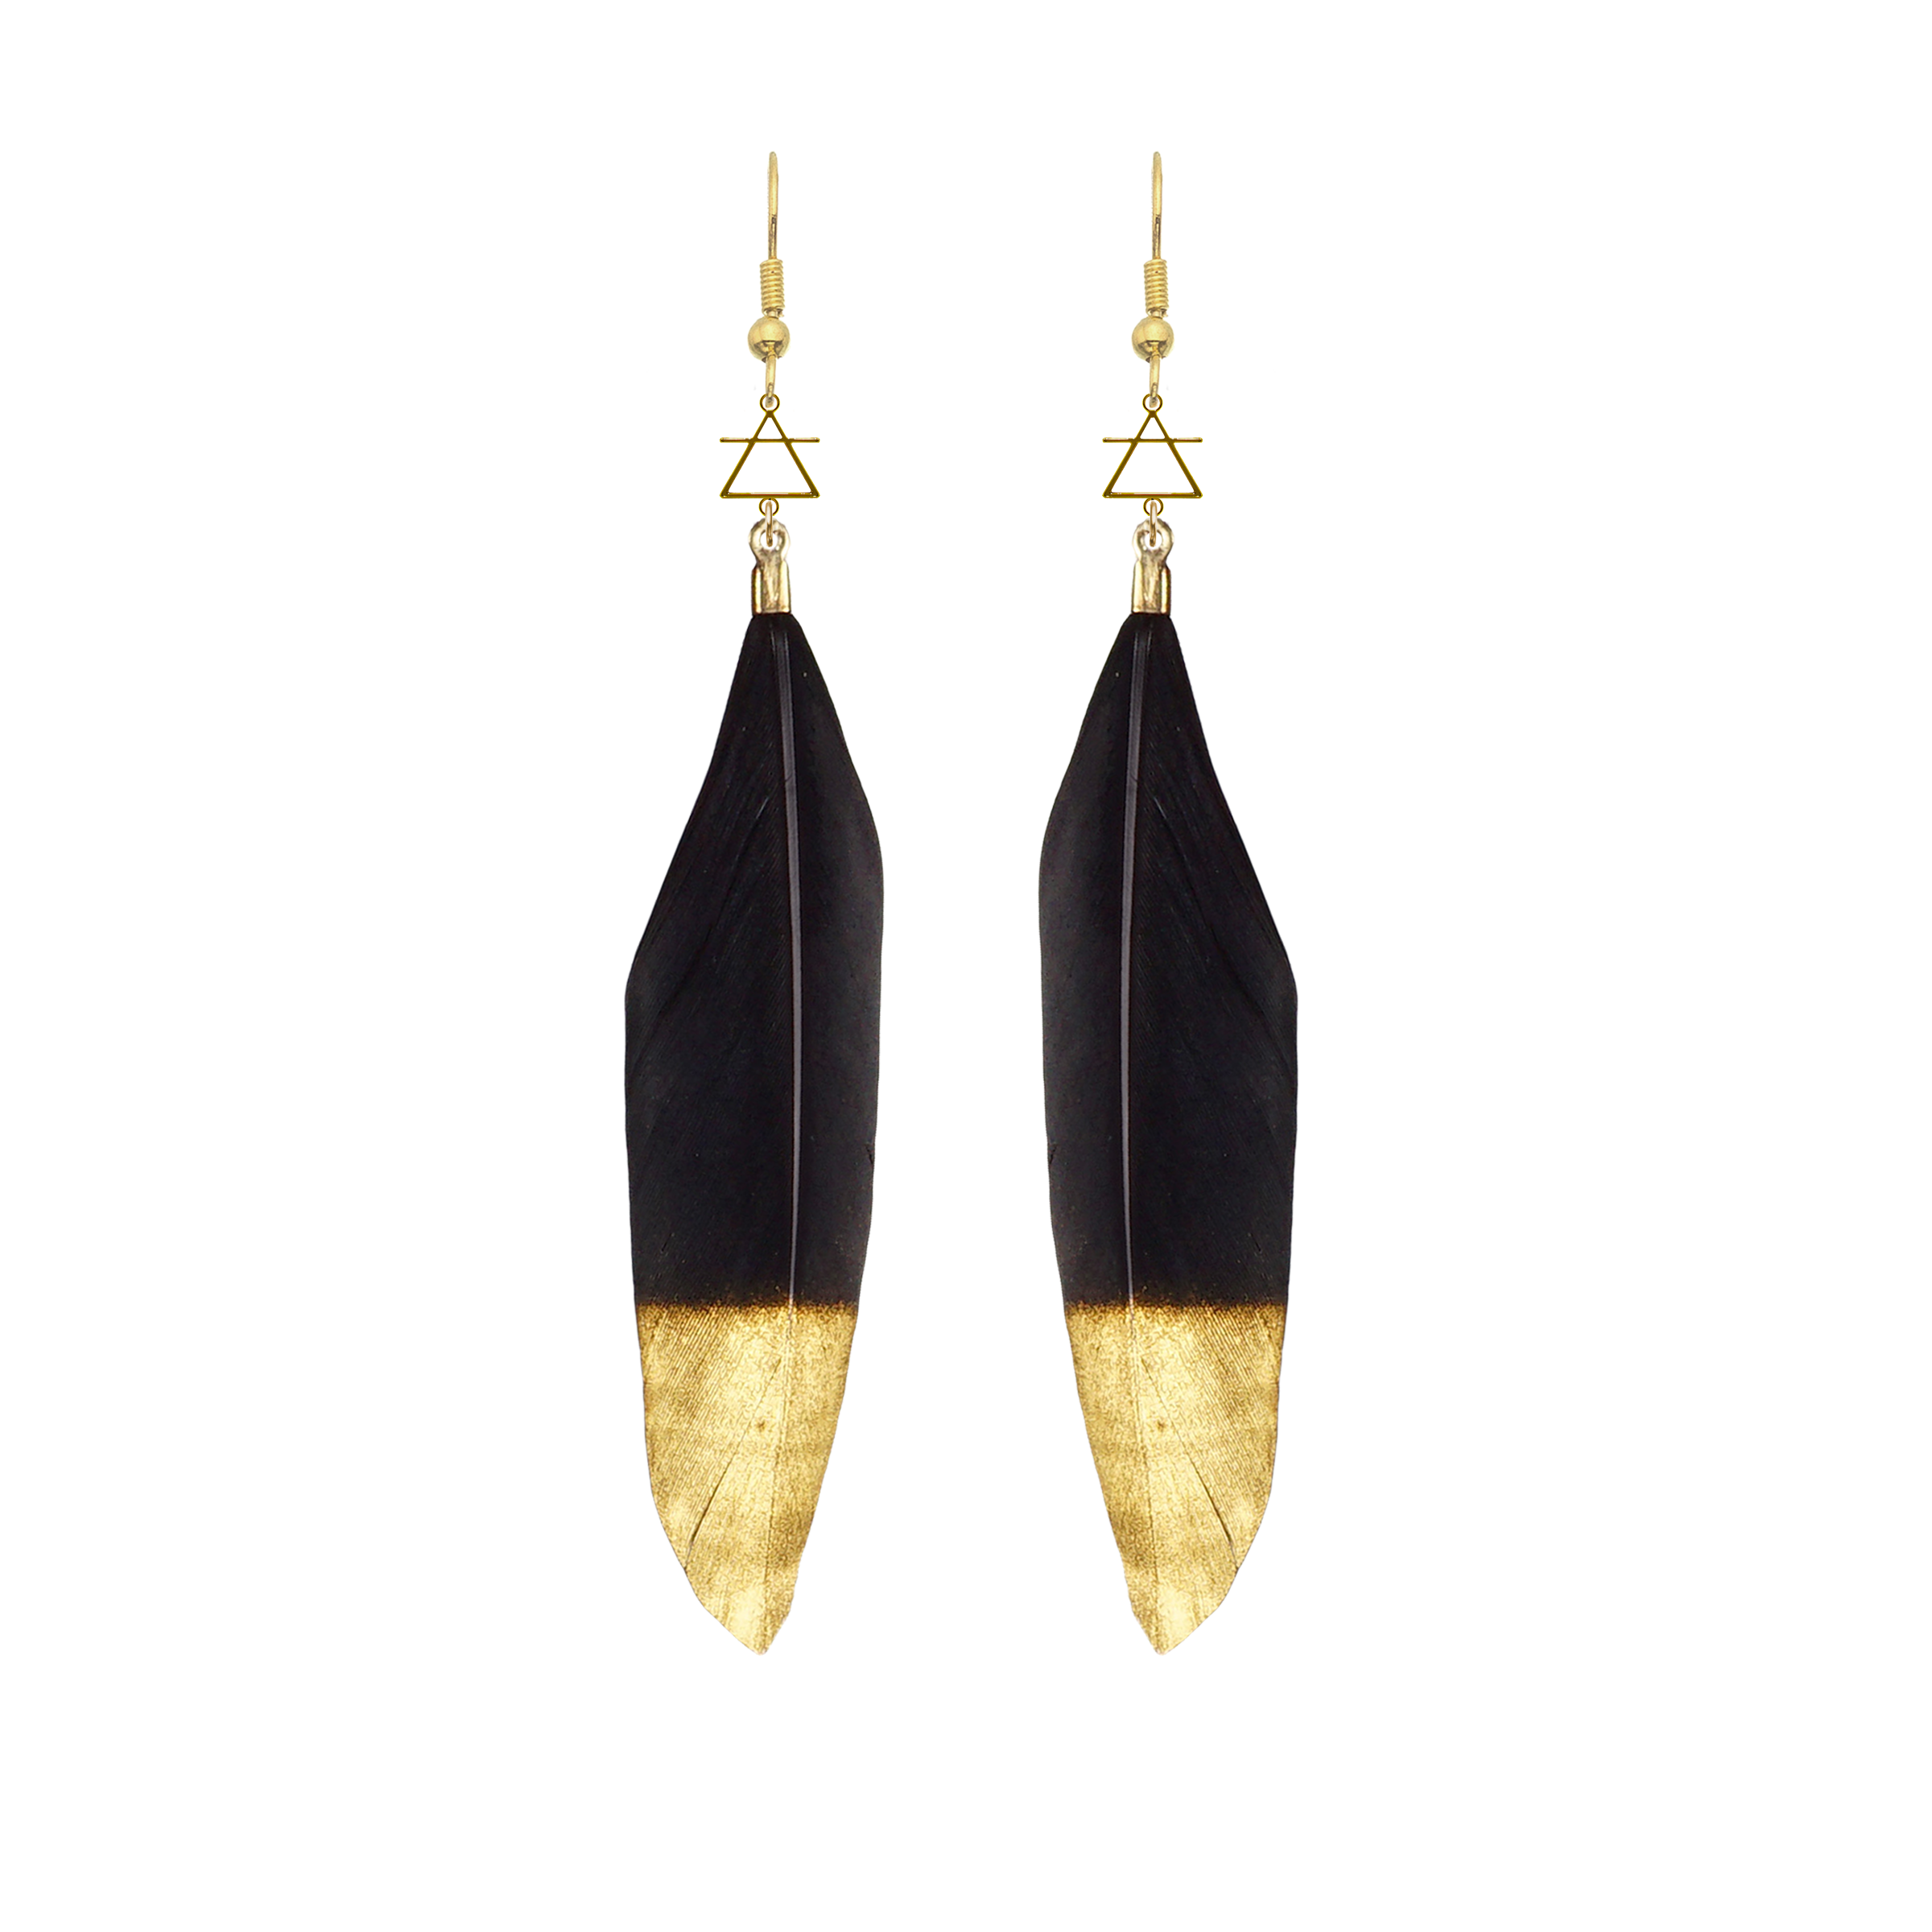 Black Feather Earrings with Symbols